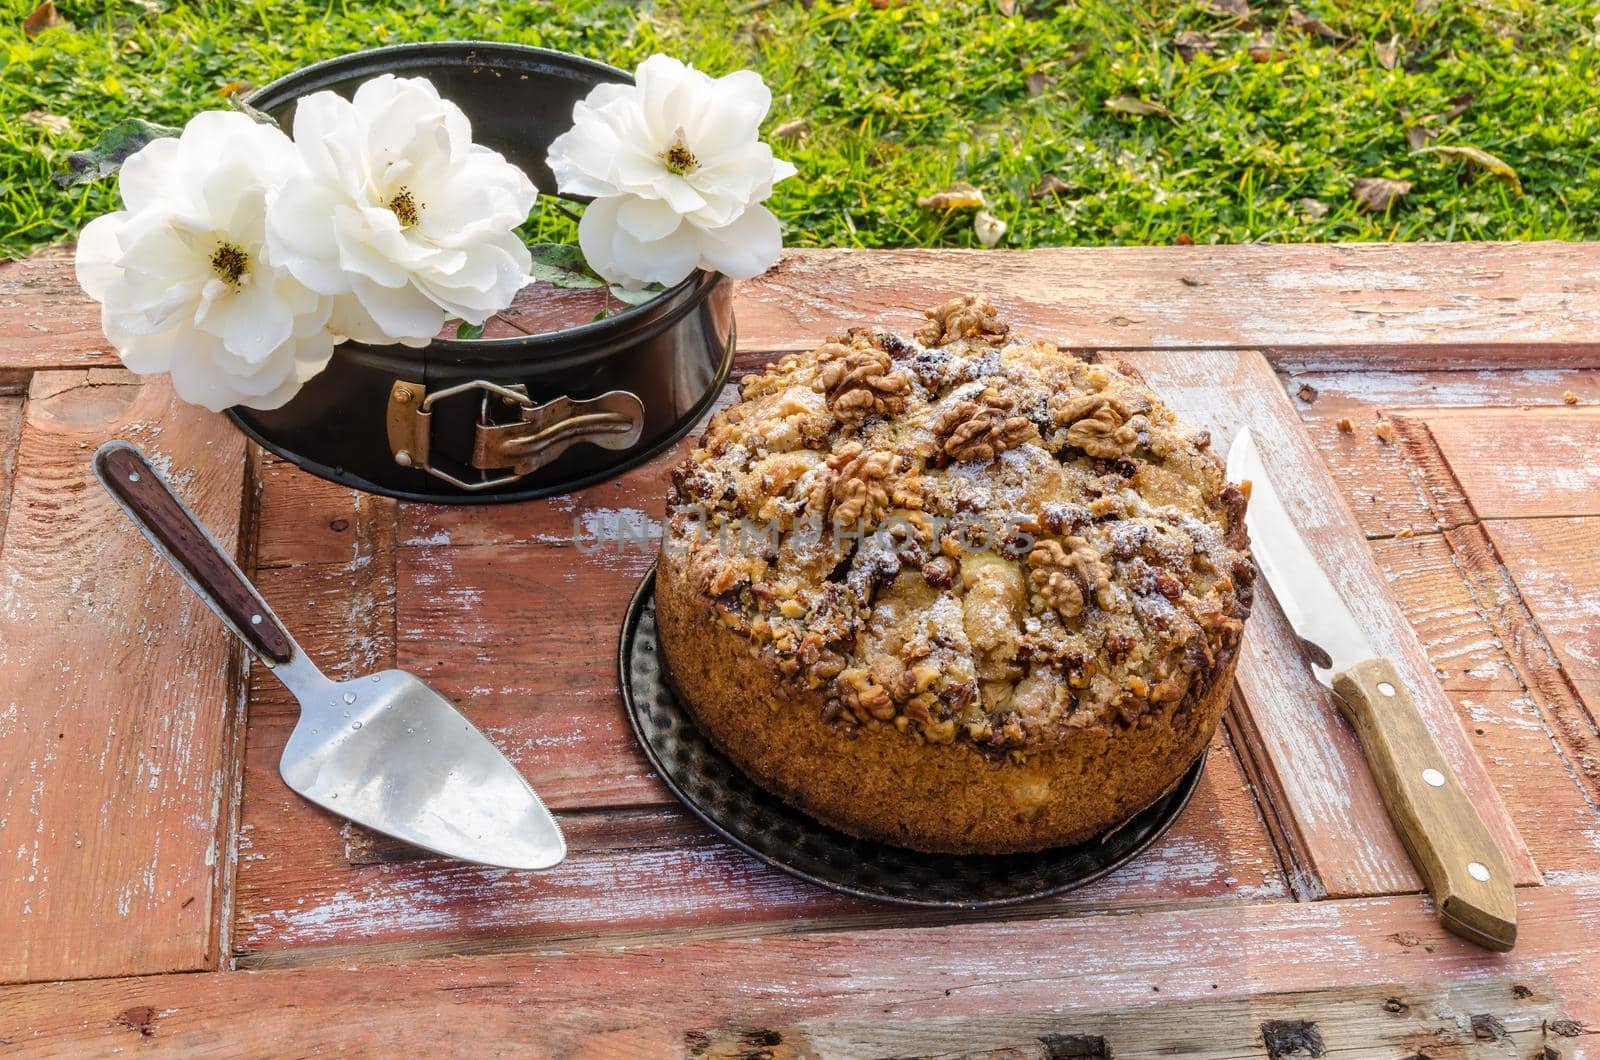 Autumn still life with cake, walnuts and white roses. Rustic style. by zimages